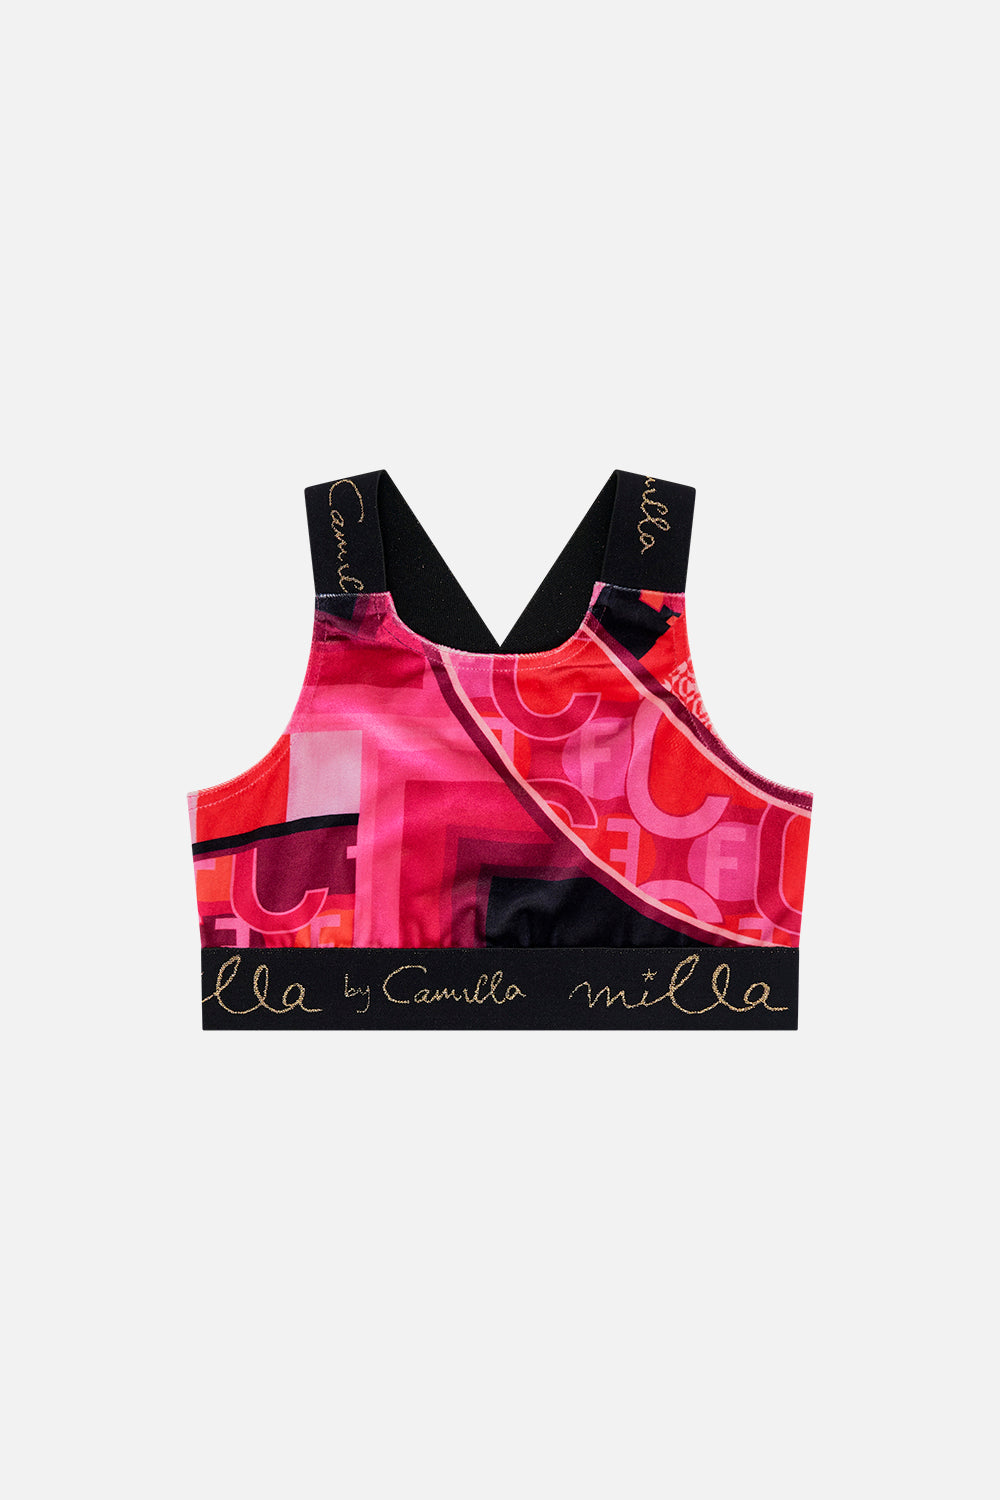 Product view of MILLA BY CAMILLA kids sports crop top in Ciao Palazzo print